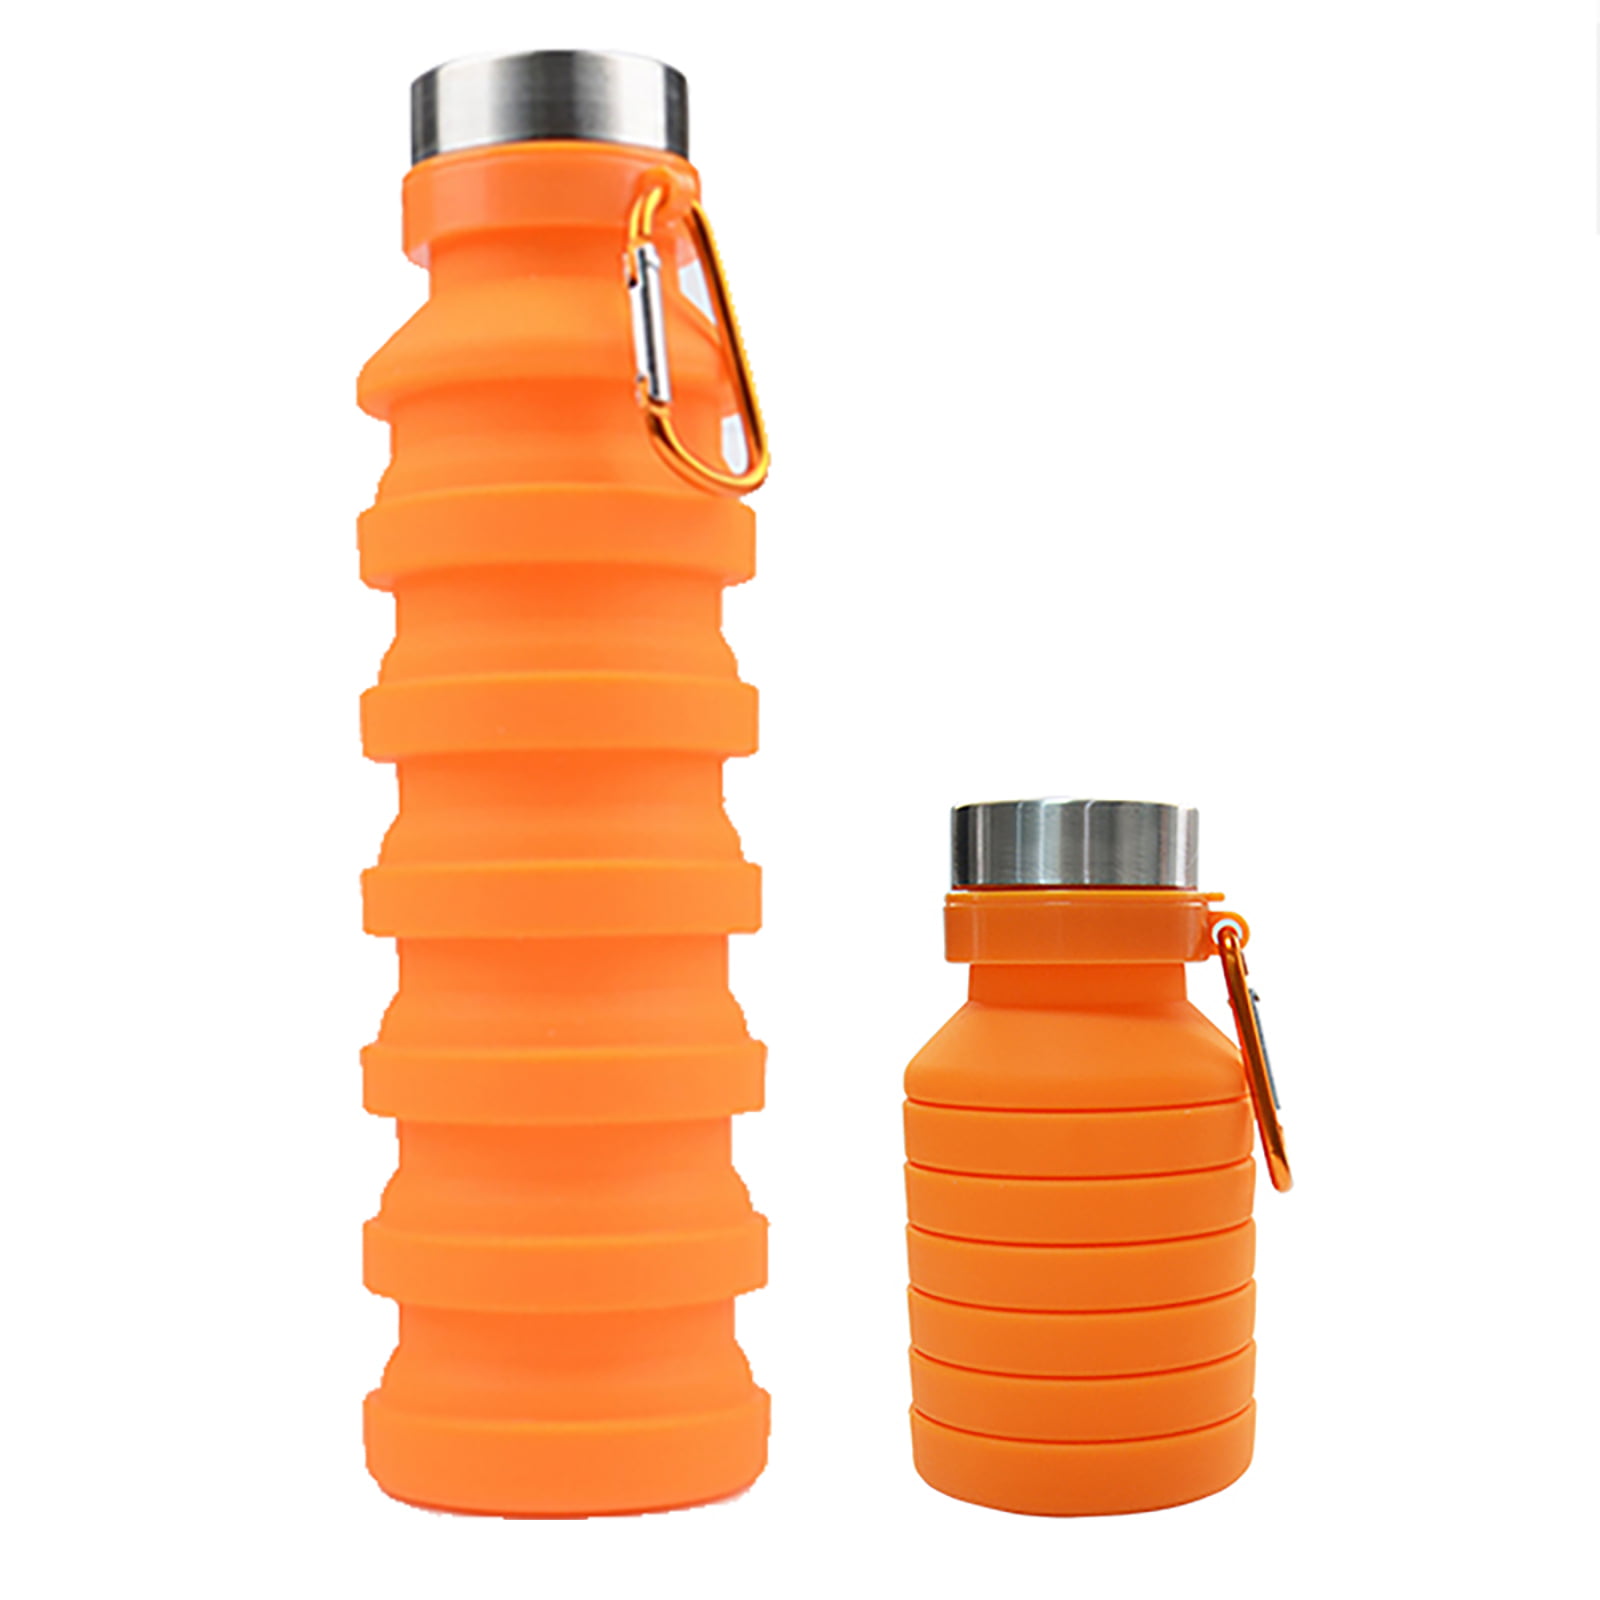 Outdoor Sport Retractable Collapsible Travel Cup Folding Silicone Water Bottle